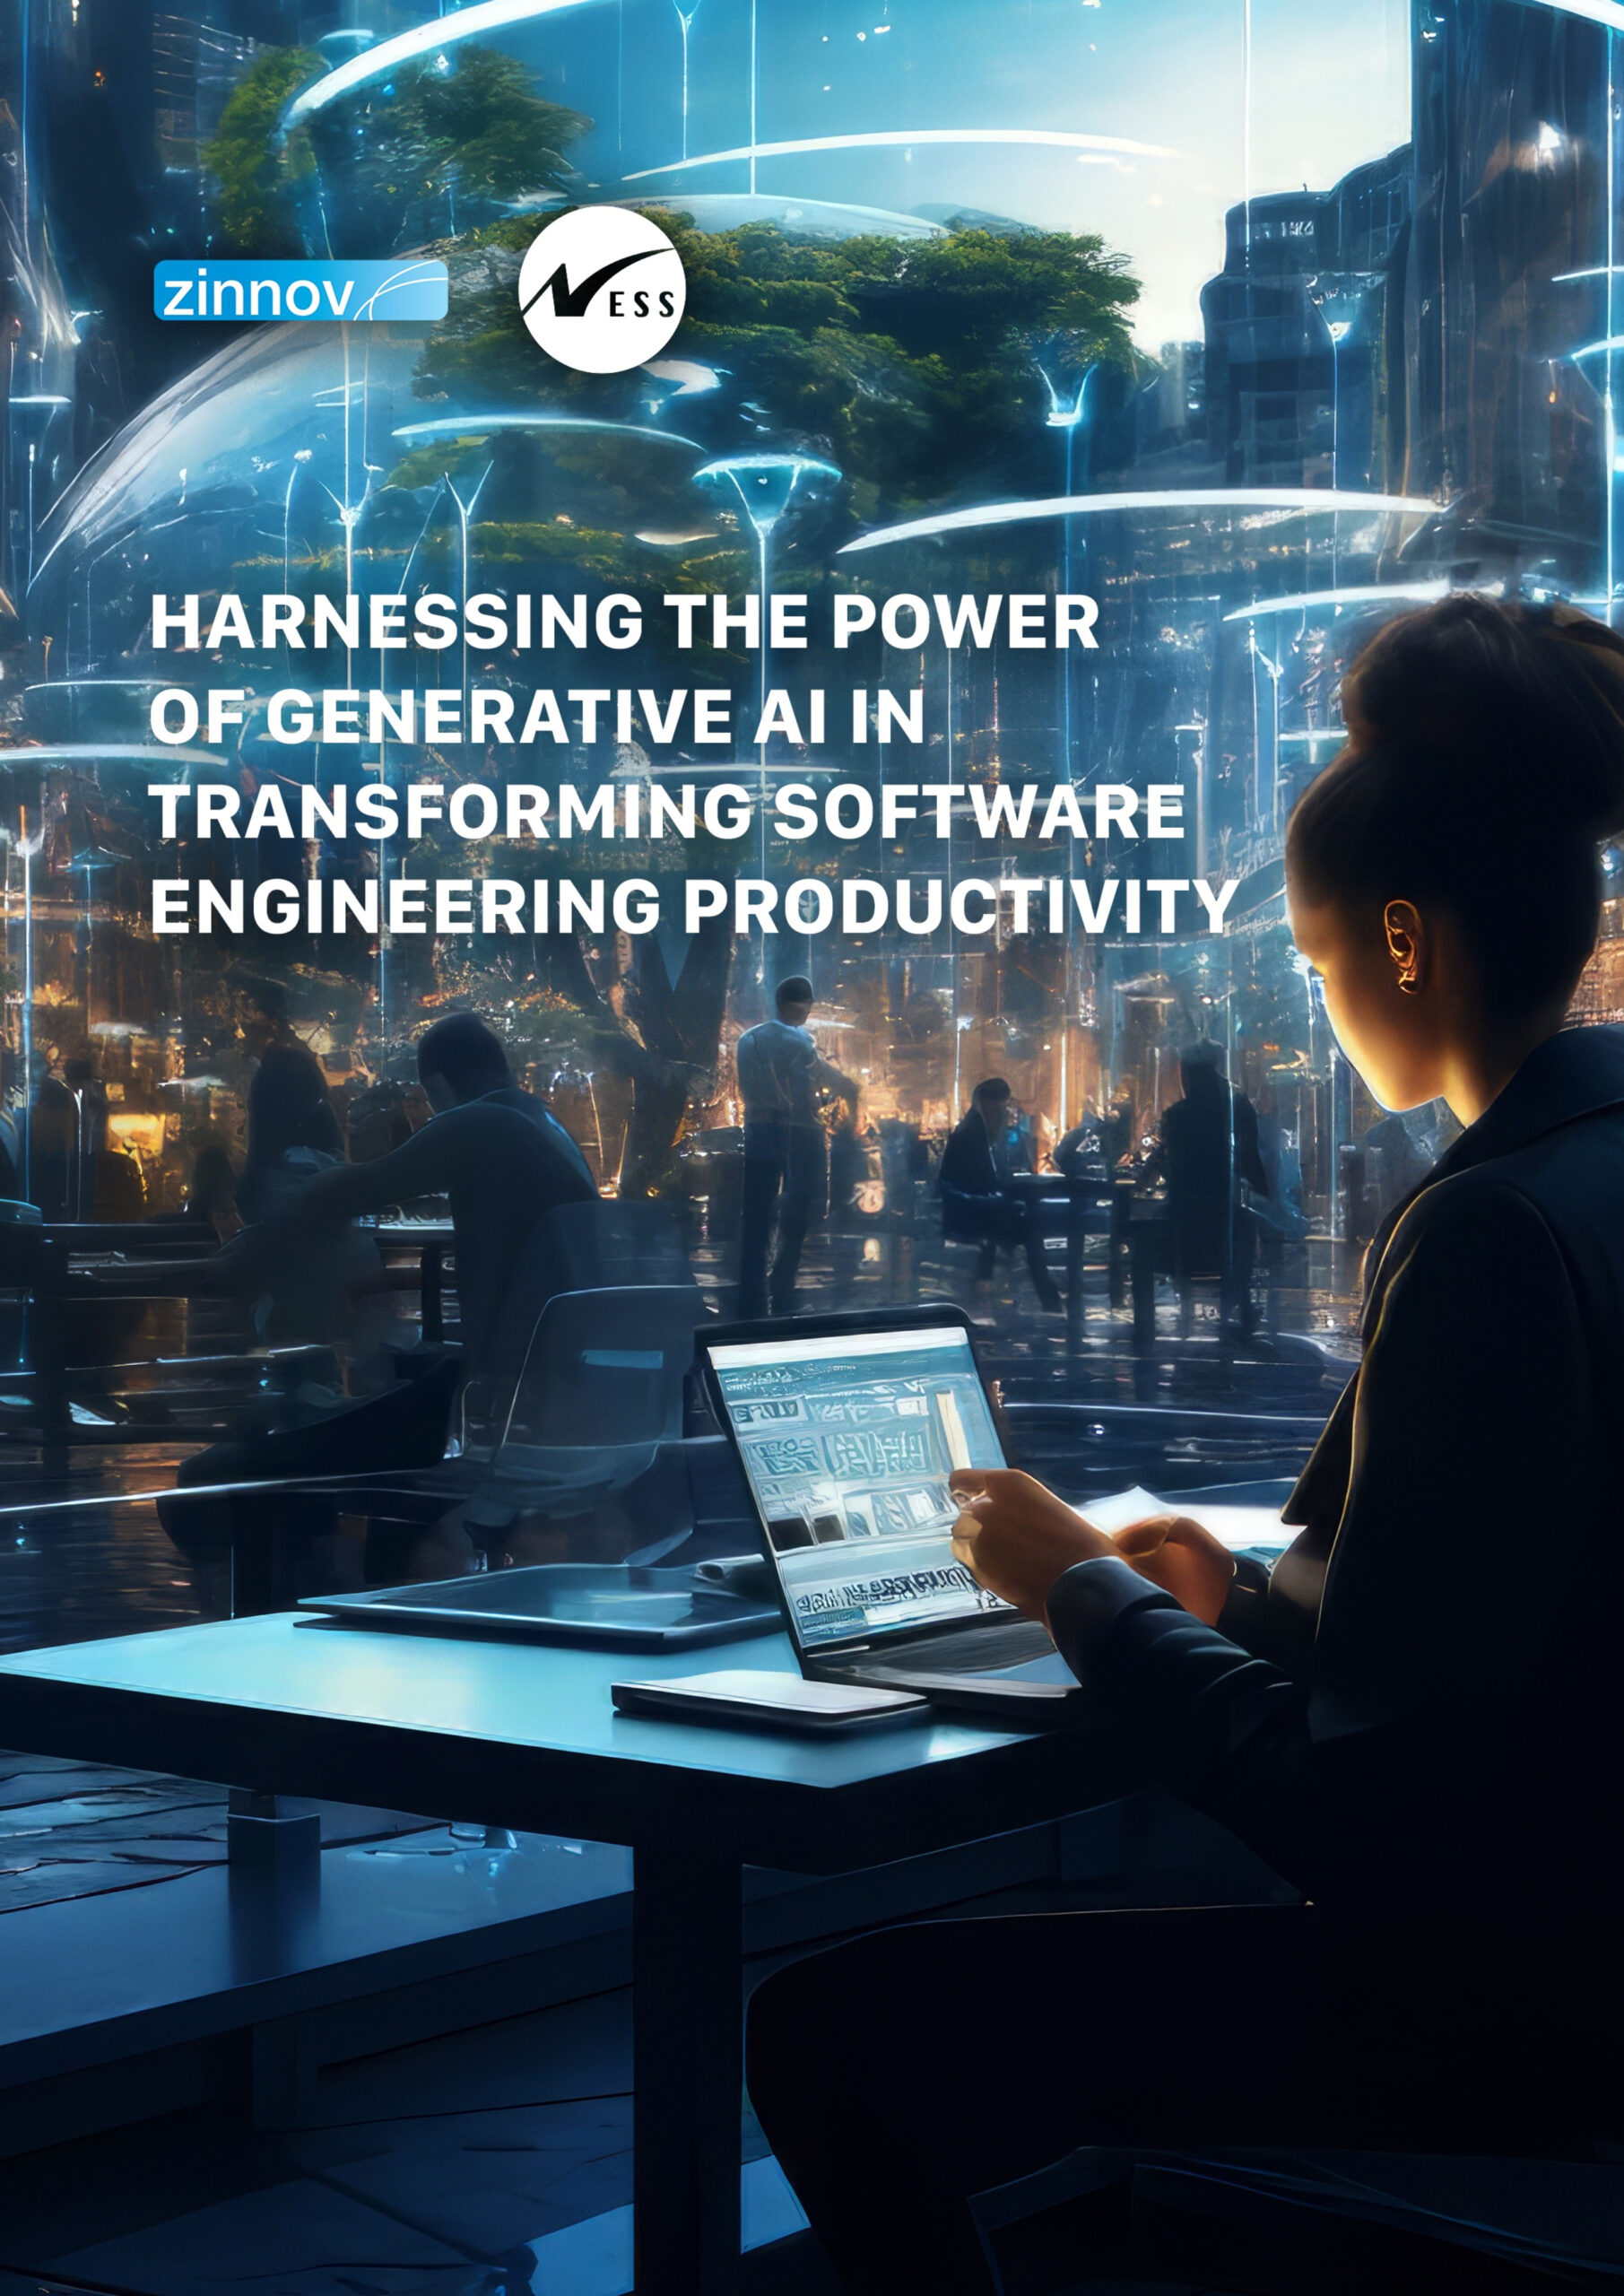 Zinnov Ness Harnessing The Power Of Generative Ai In Software Engineering Productivity Whitepaper1 Scaled